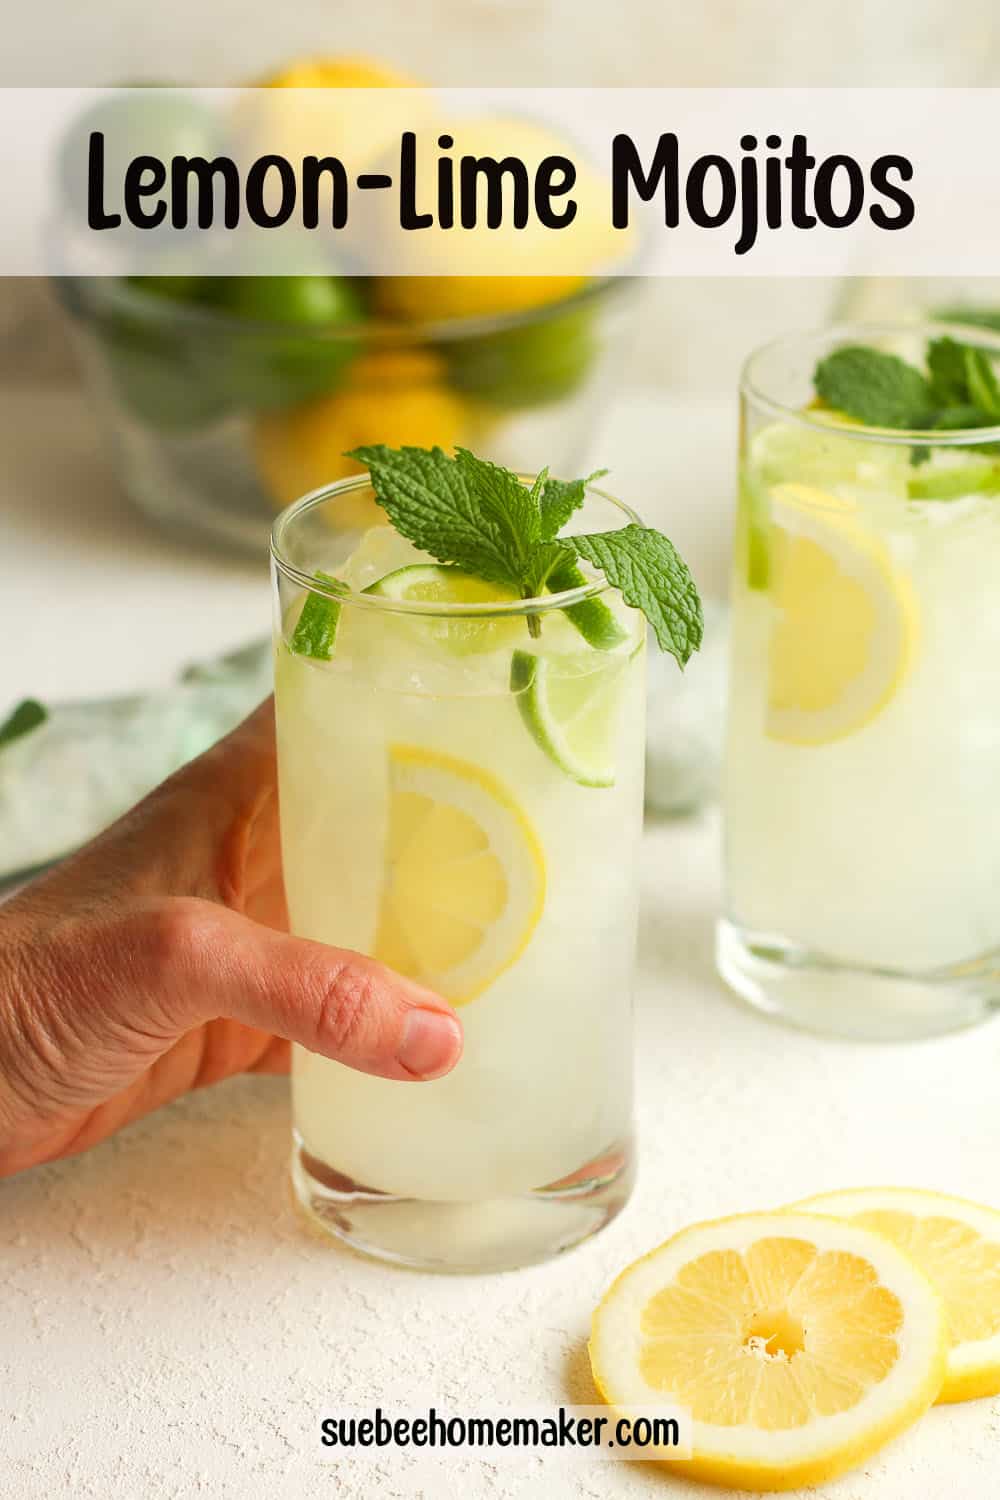 Two glasses of mojitos with lemon lime flavors.